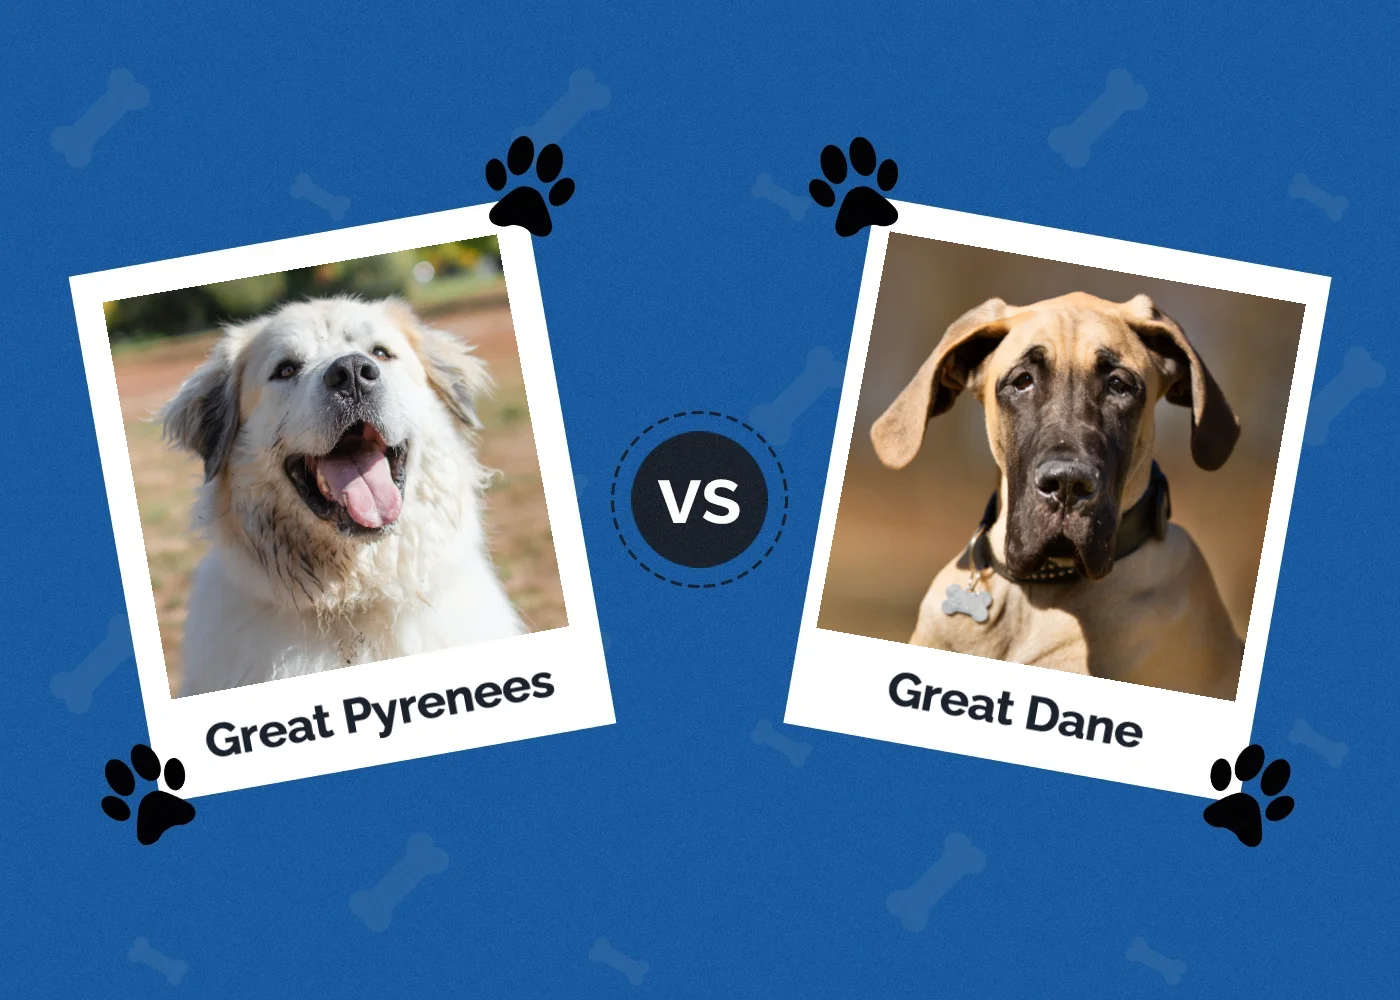 Great Pyrenees vs Great Dane - Featured Image